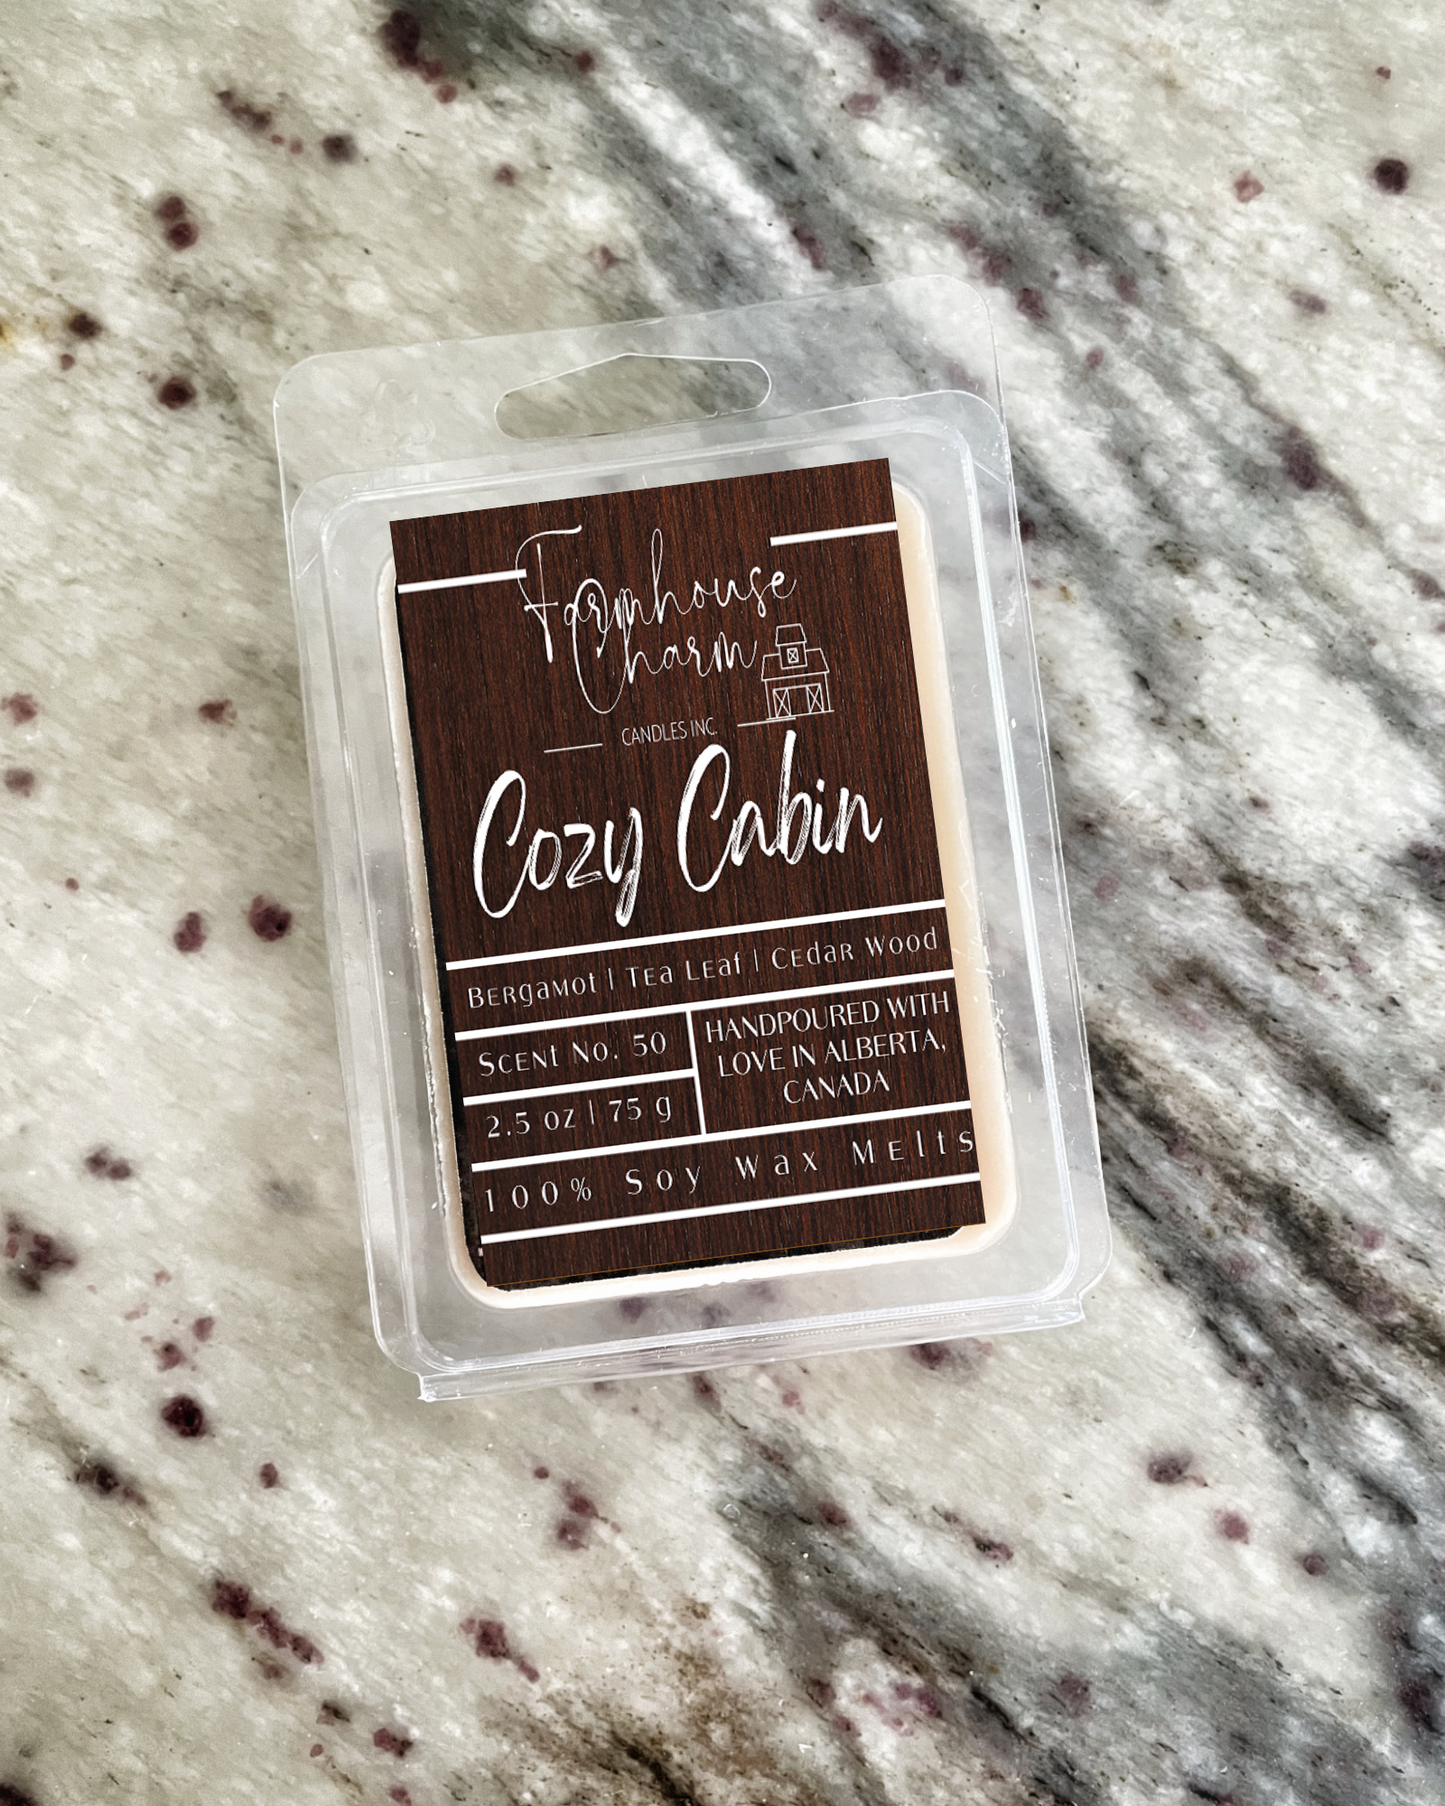 Cozy Cabin Soy Wax Melts is more than just a aroma, it's an experience that will take you on a journey to a place of comfort and relaxation. The blend of bergamot, tea leaf, and cedarwood creates a unique fragrance that is perfect for fall and adds a touch of farmhouse charm to any living space.  size: 2.5 oz. (75 g)